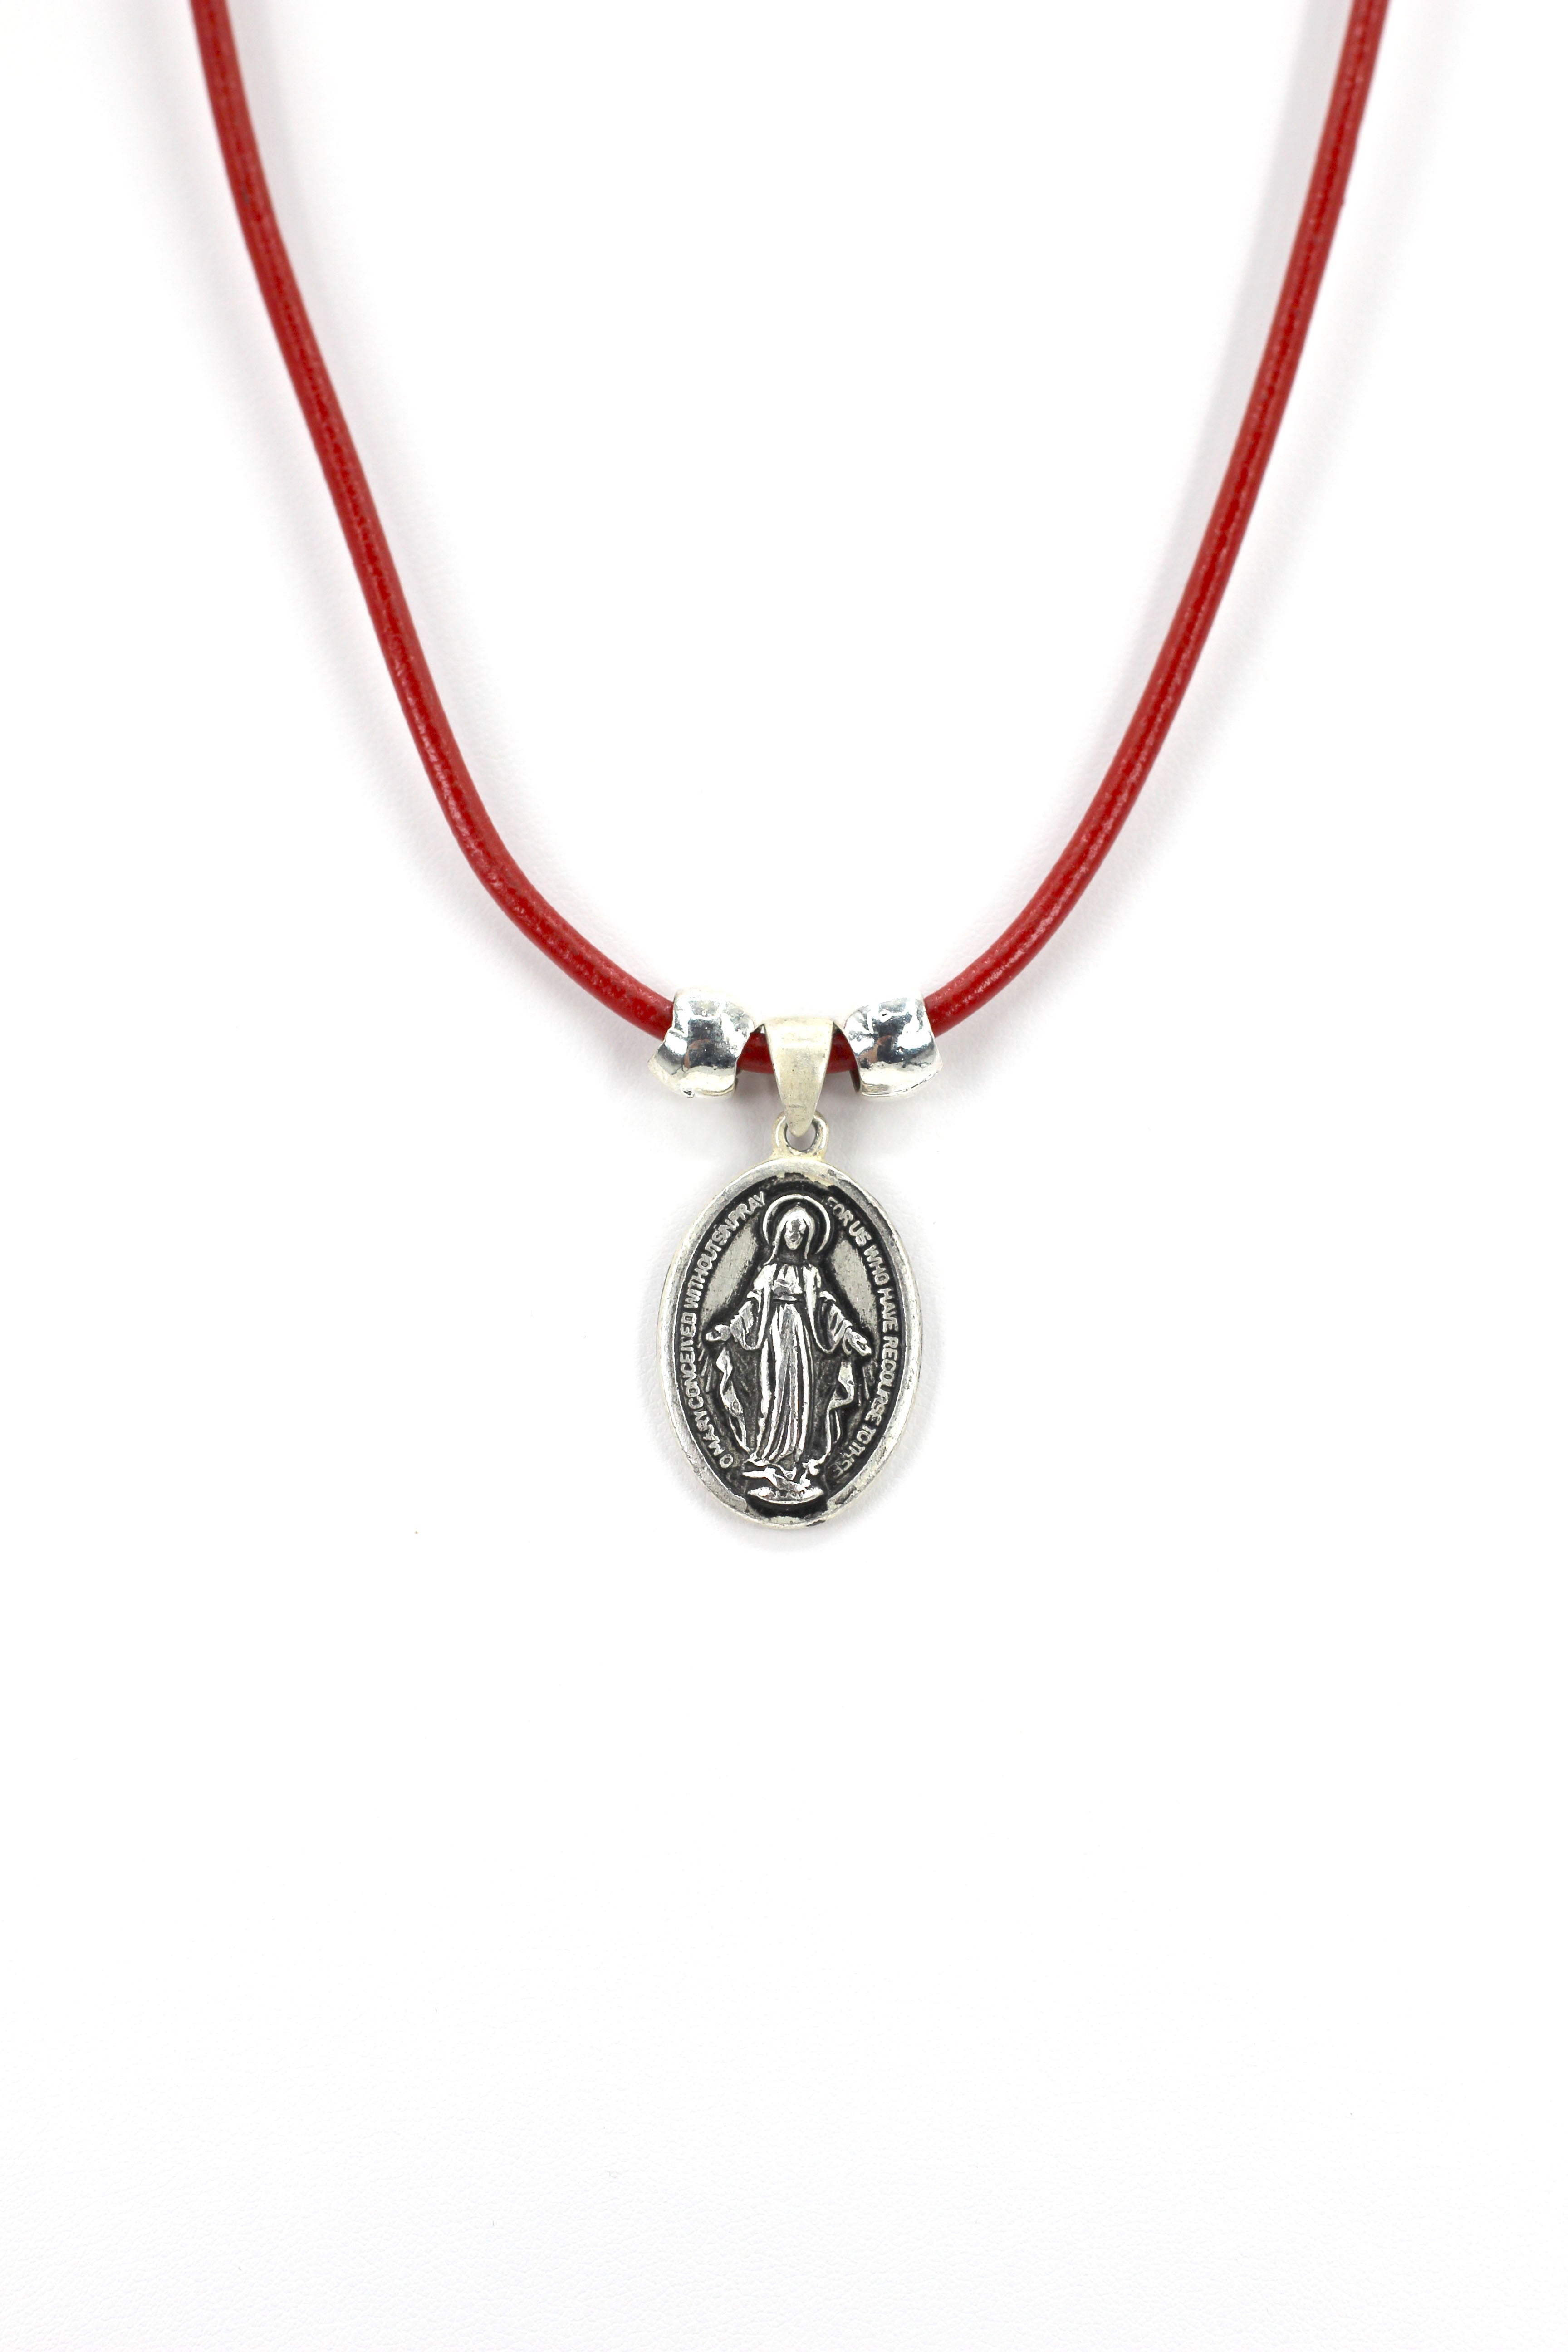 Vintage Necklace of The Miraculous Virgen Mary Handmade Oval Shape  Jewelry with Genuine Leather strap by Graciela's Collection